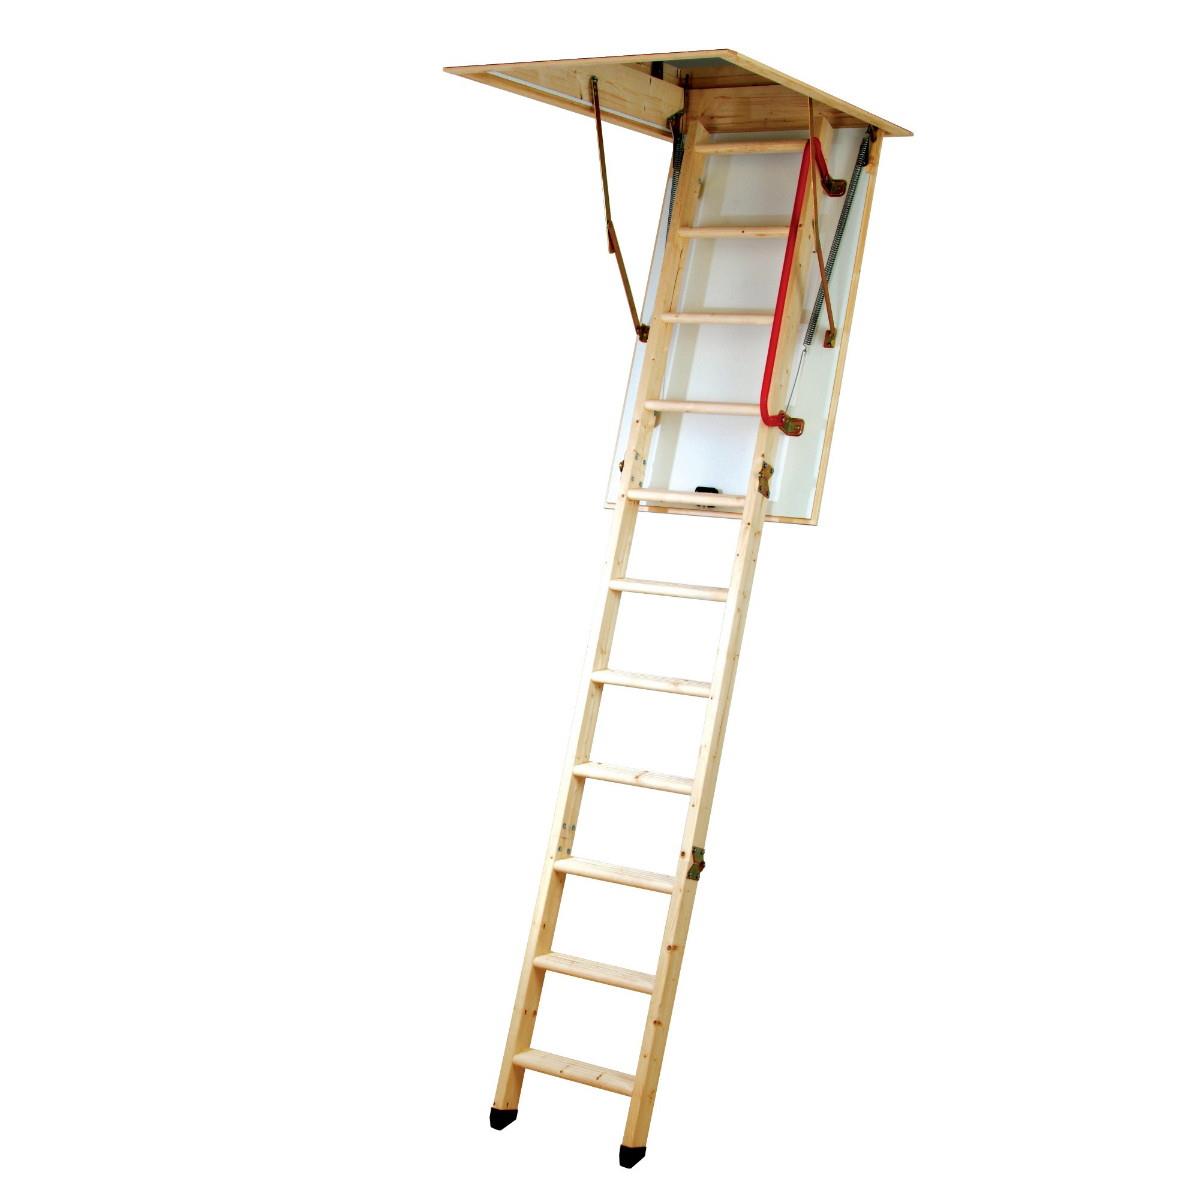 Youngman 34535000 Eco Slide Loft Ladder; 3 SectionTimber; Opening 1.15m x 0.57m; Max Floor To Ceiling 2.85m